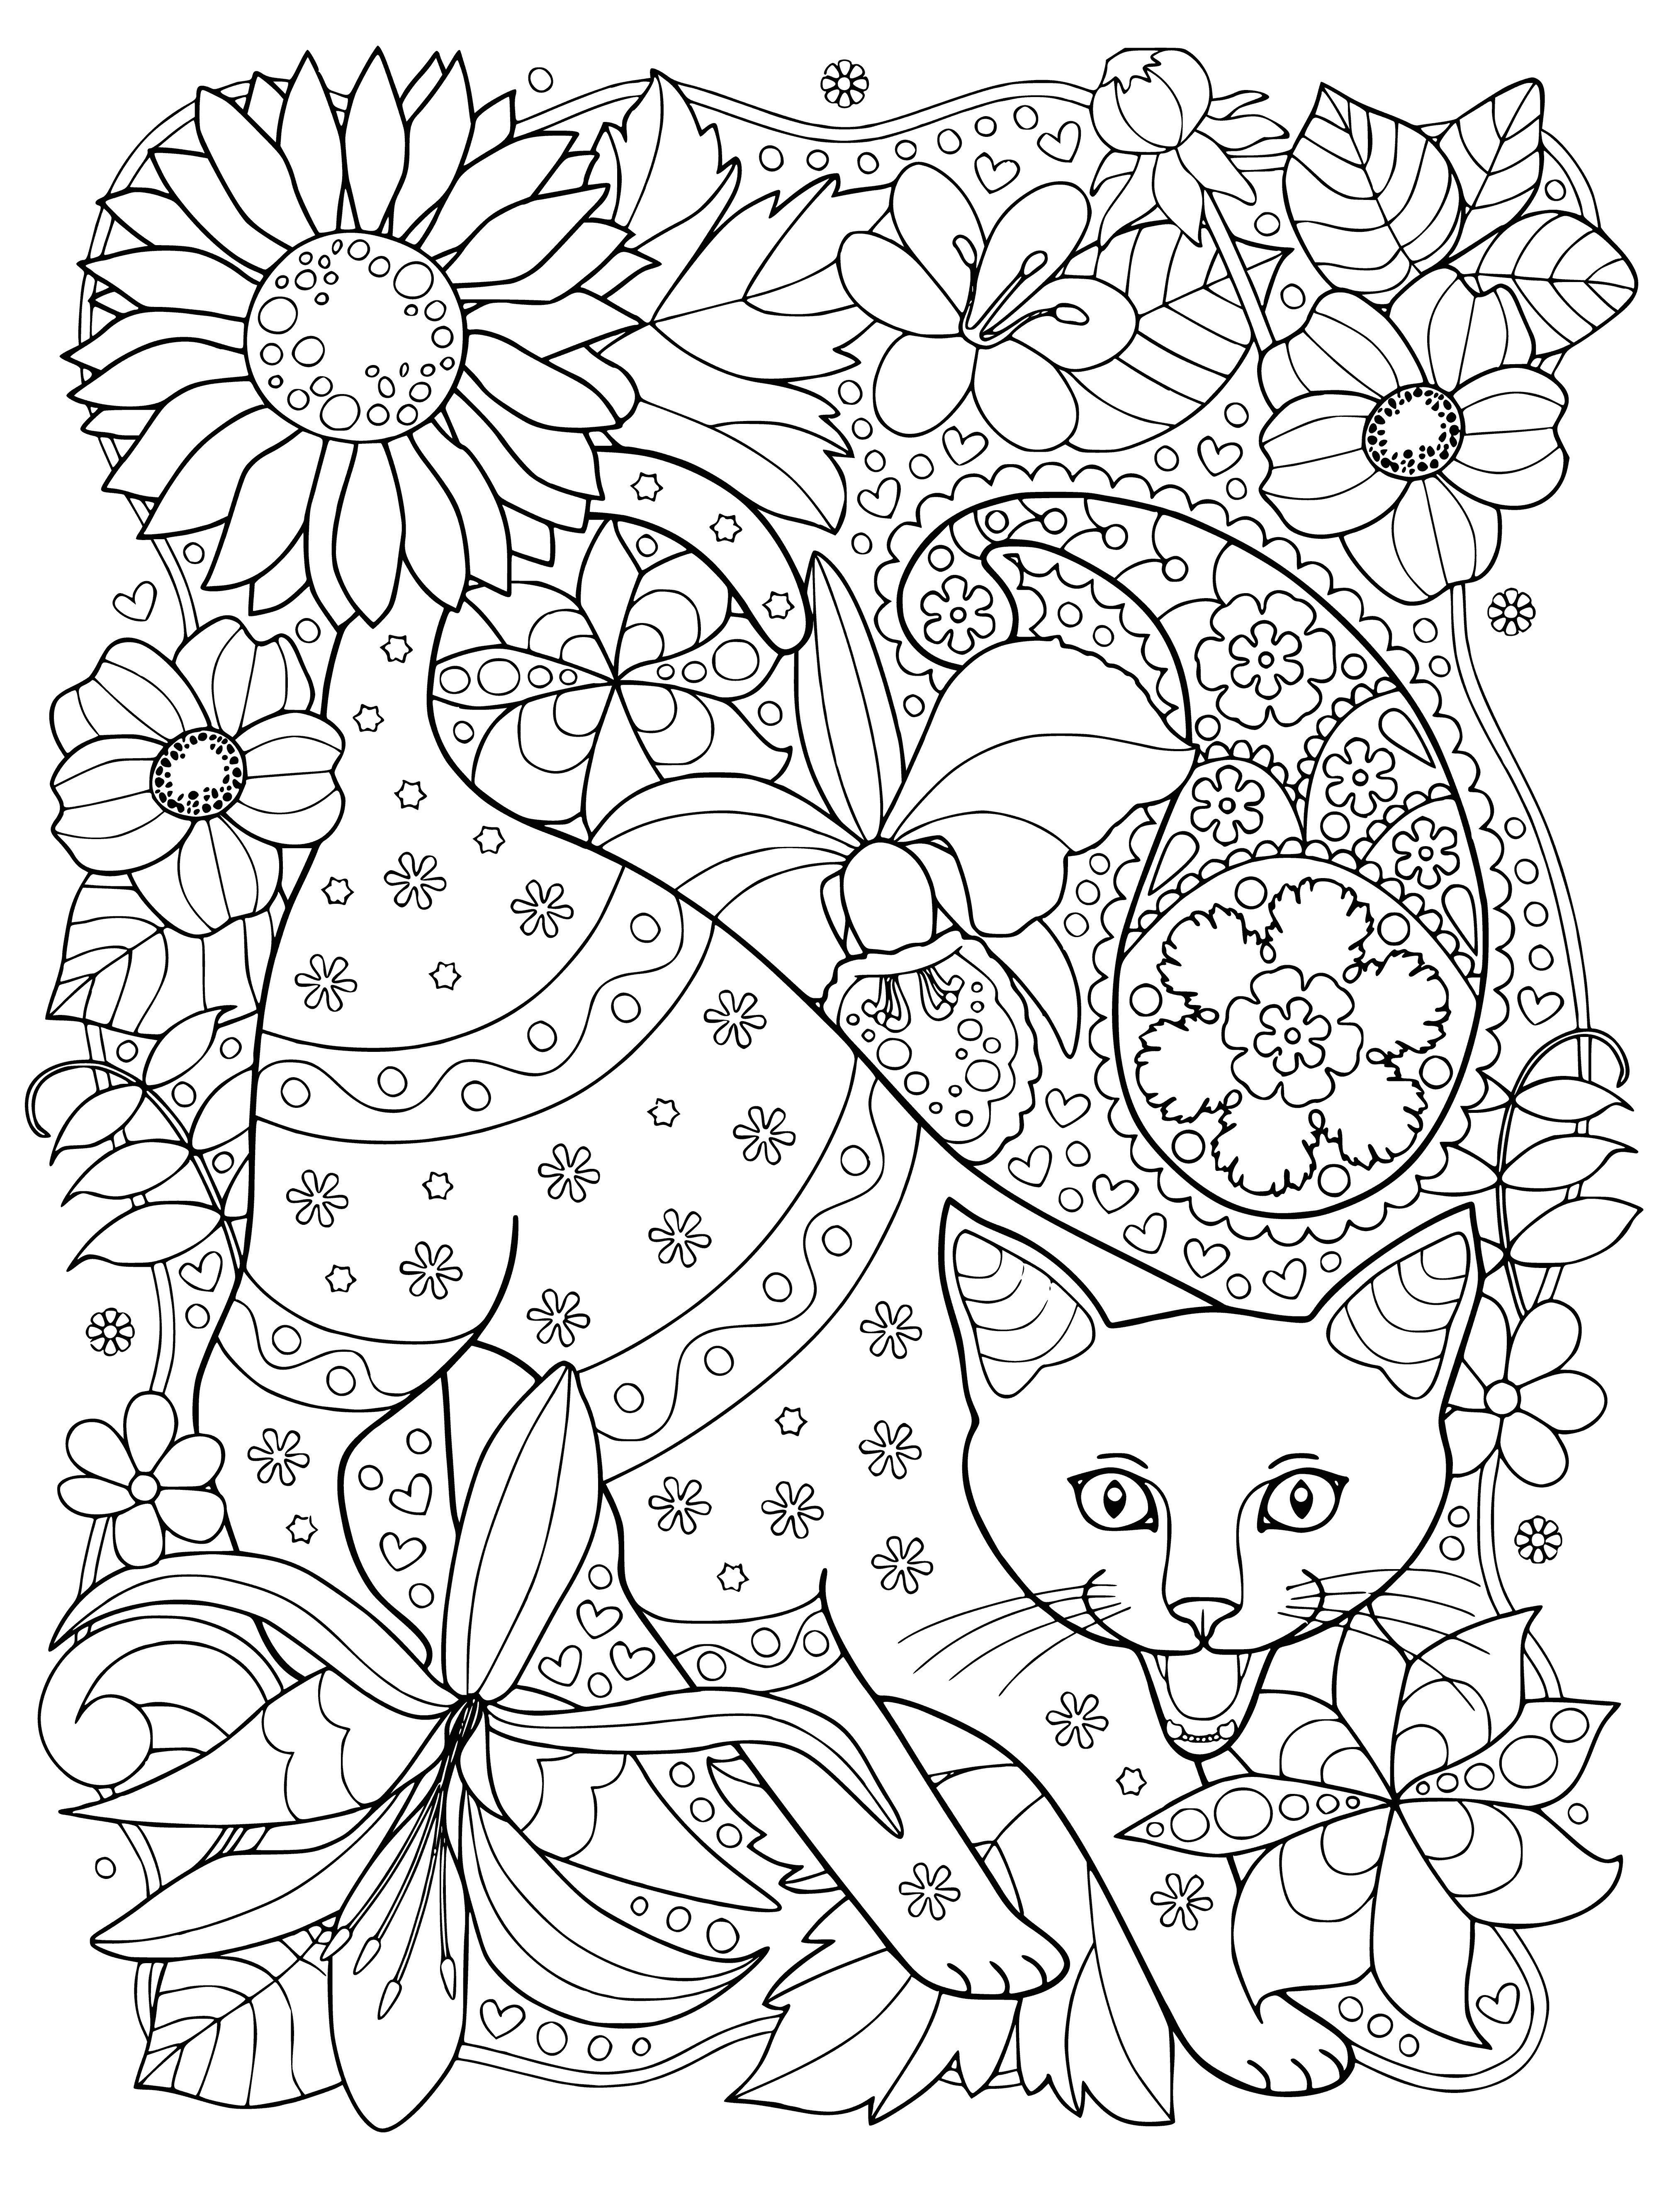 Cat meows coloring page